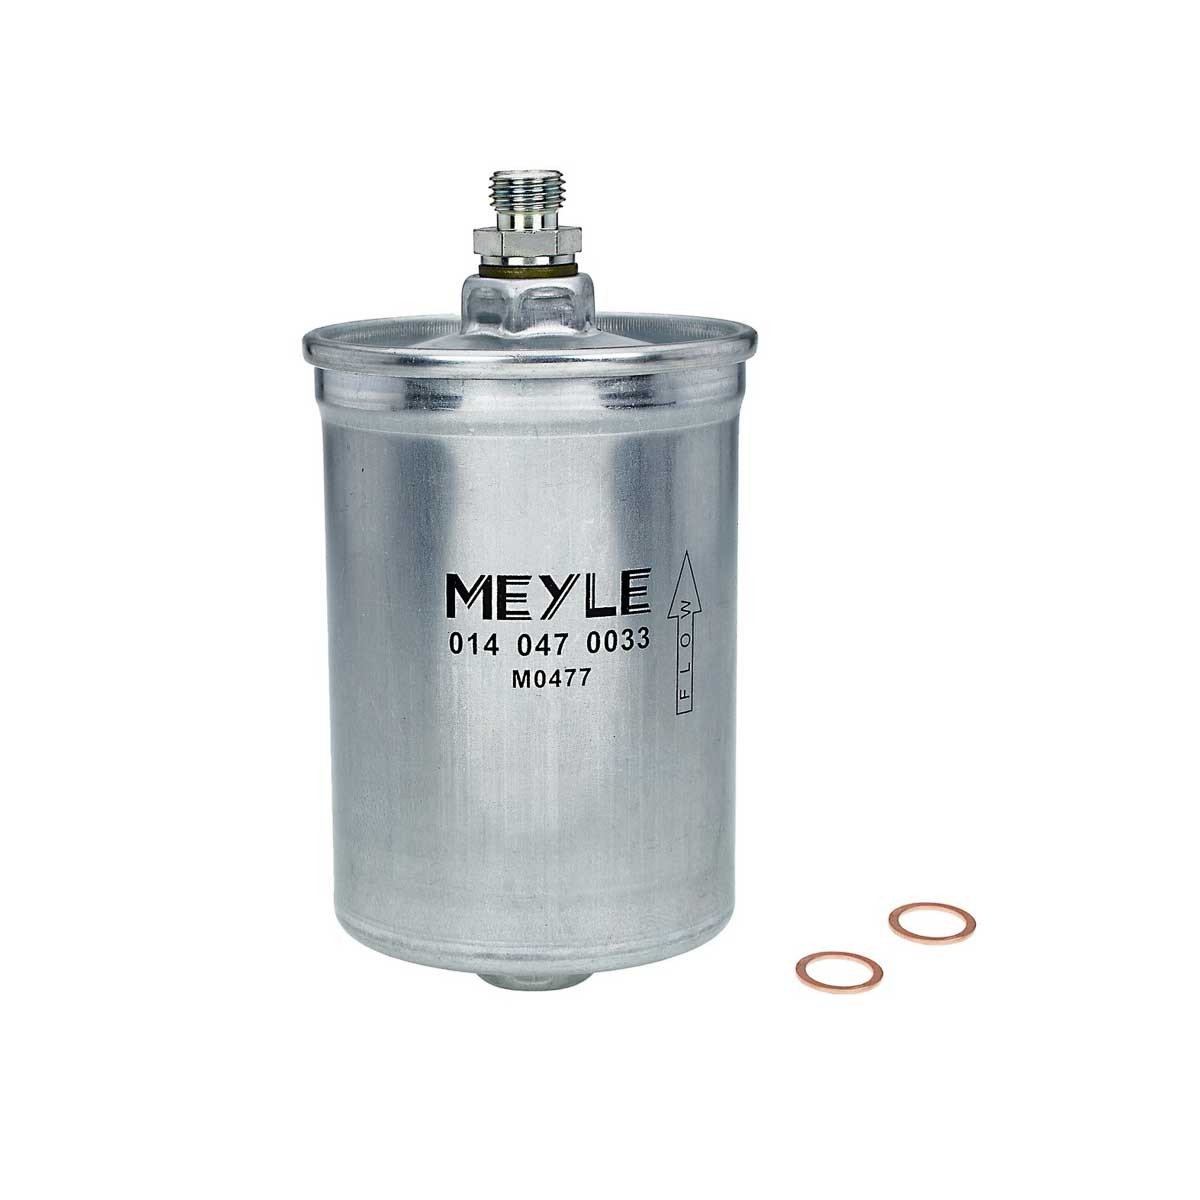 MEYLE Inline fuel filter diesel and petrol MERCEDES-BENZ E-Class T-modell (S124) new 014 047 0033